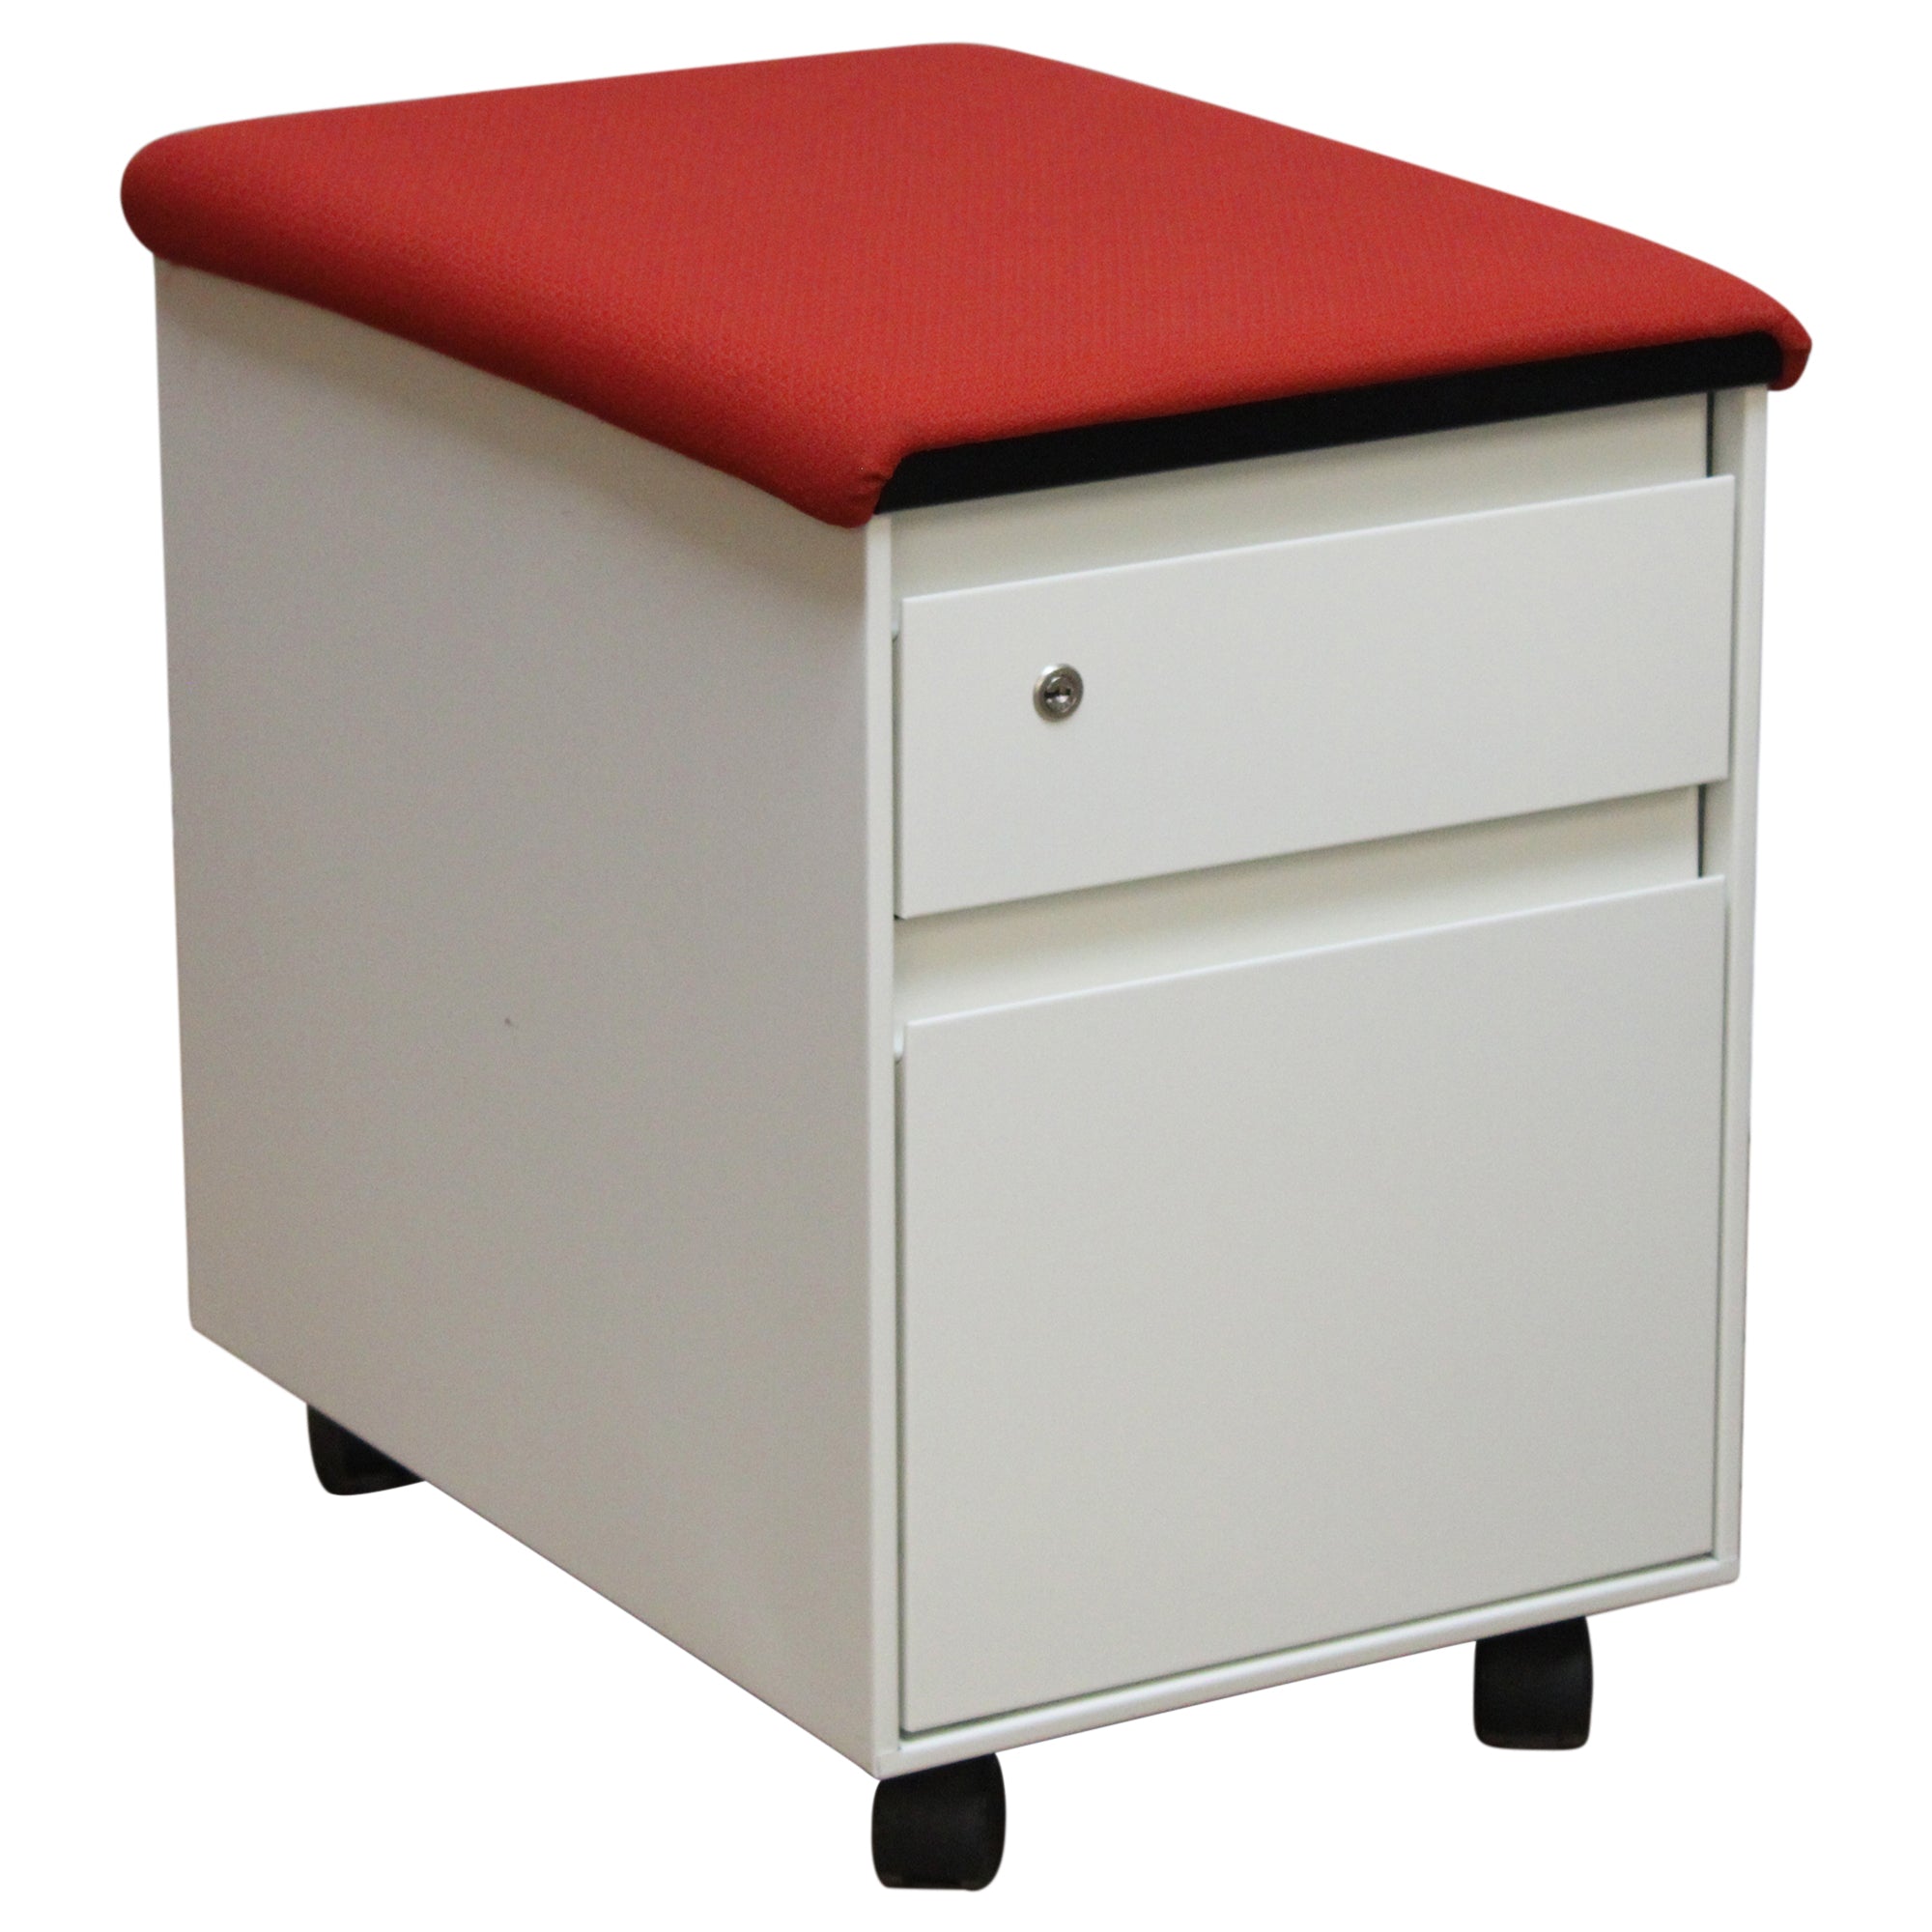 Steelcase 2-Drawer Mobile Pedestal with Cushion, White & Red - Preowned